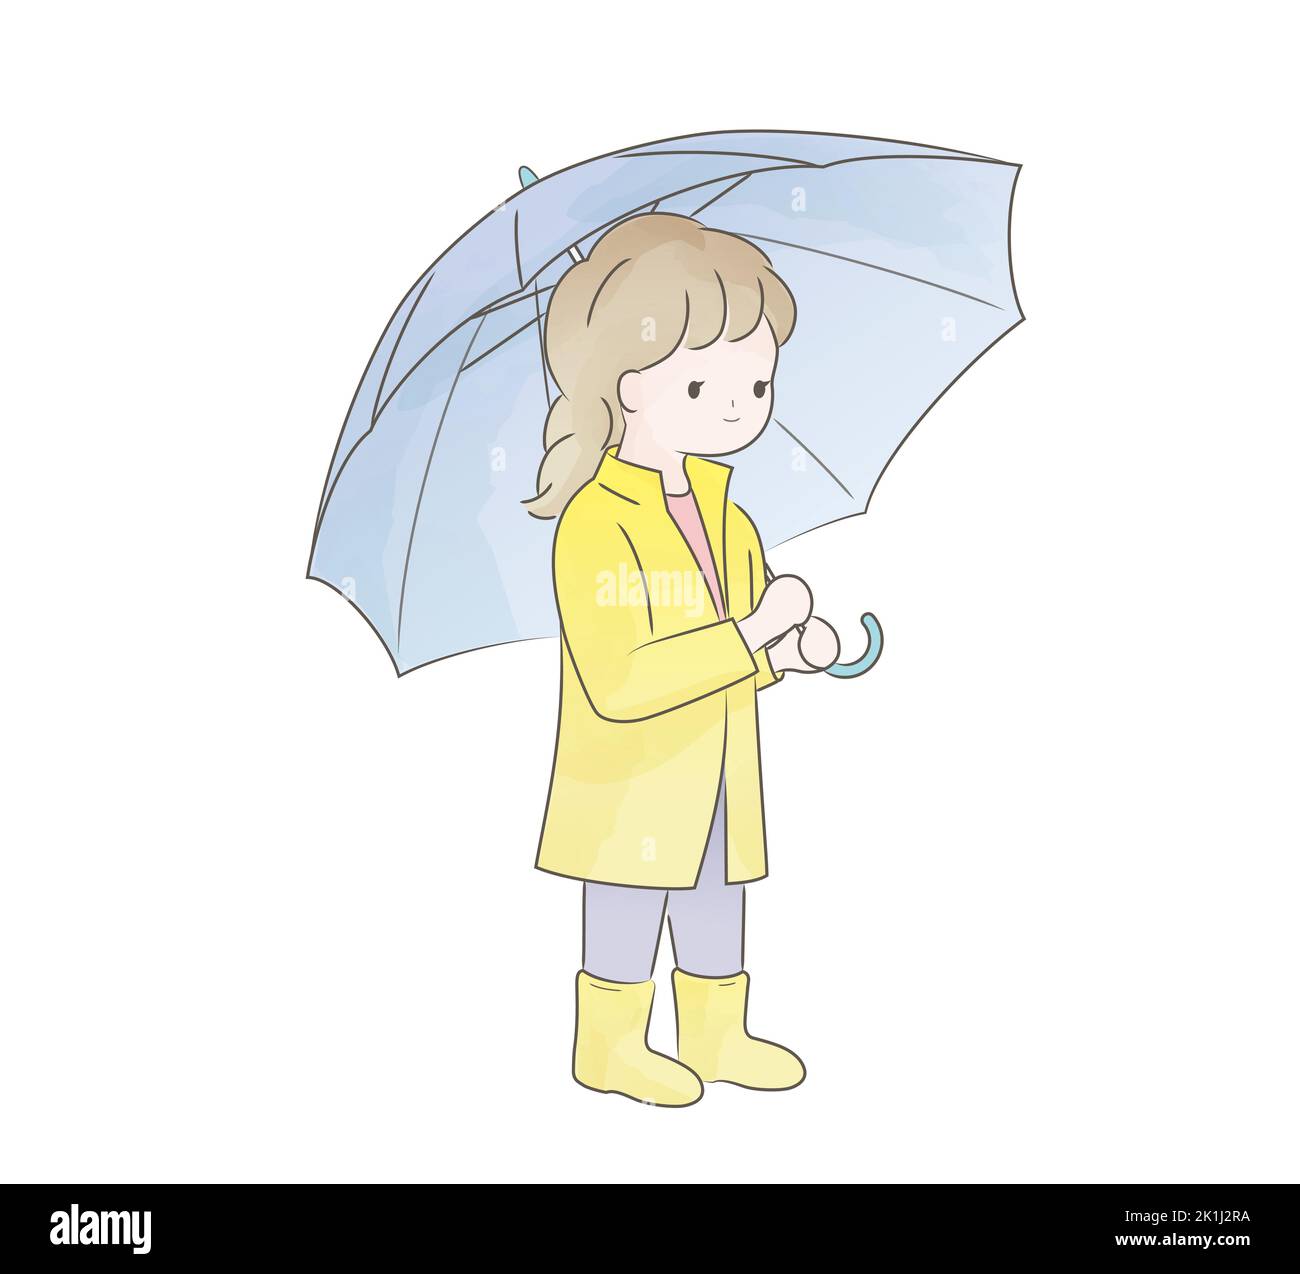 Watercolor Cute Girl In A Raincoat Holding An Umbrella. Vector Illustration Isolated On A White Background. Stock Vector